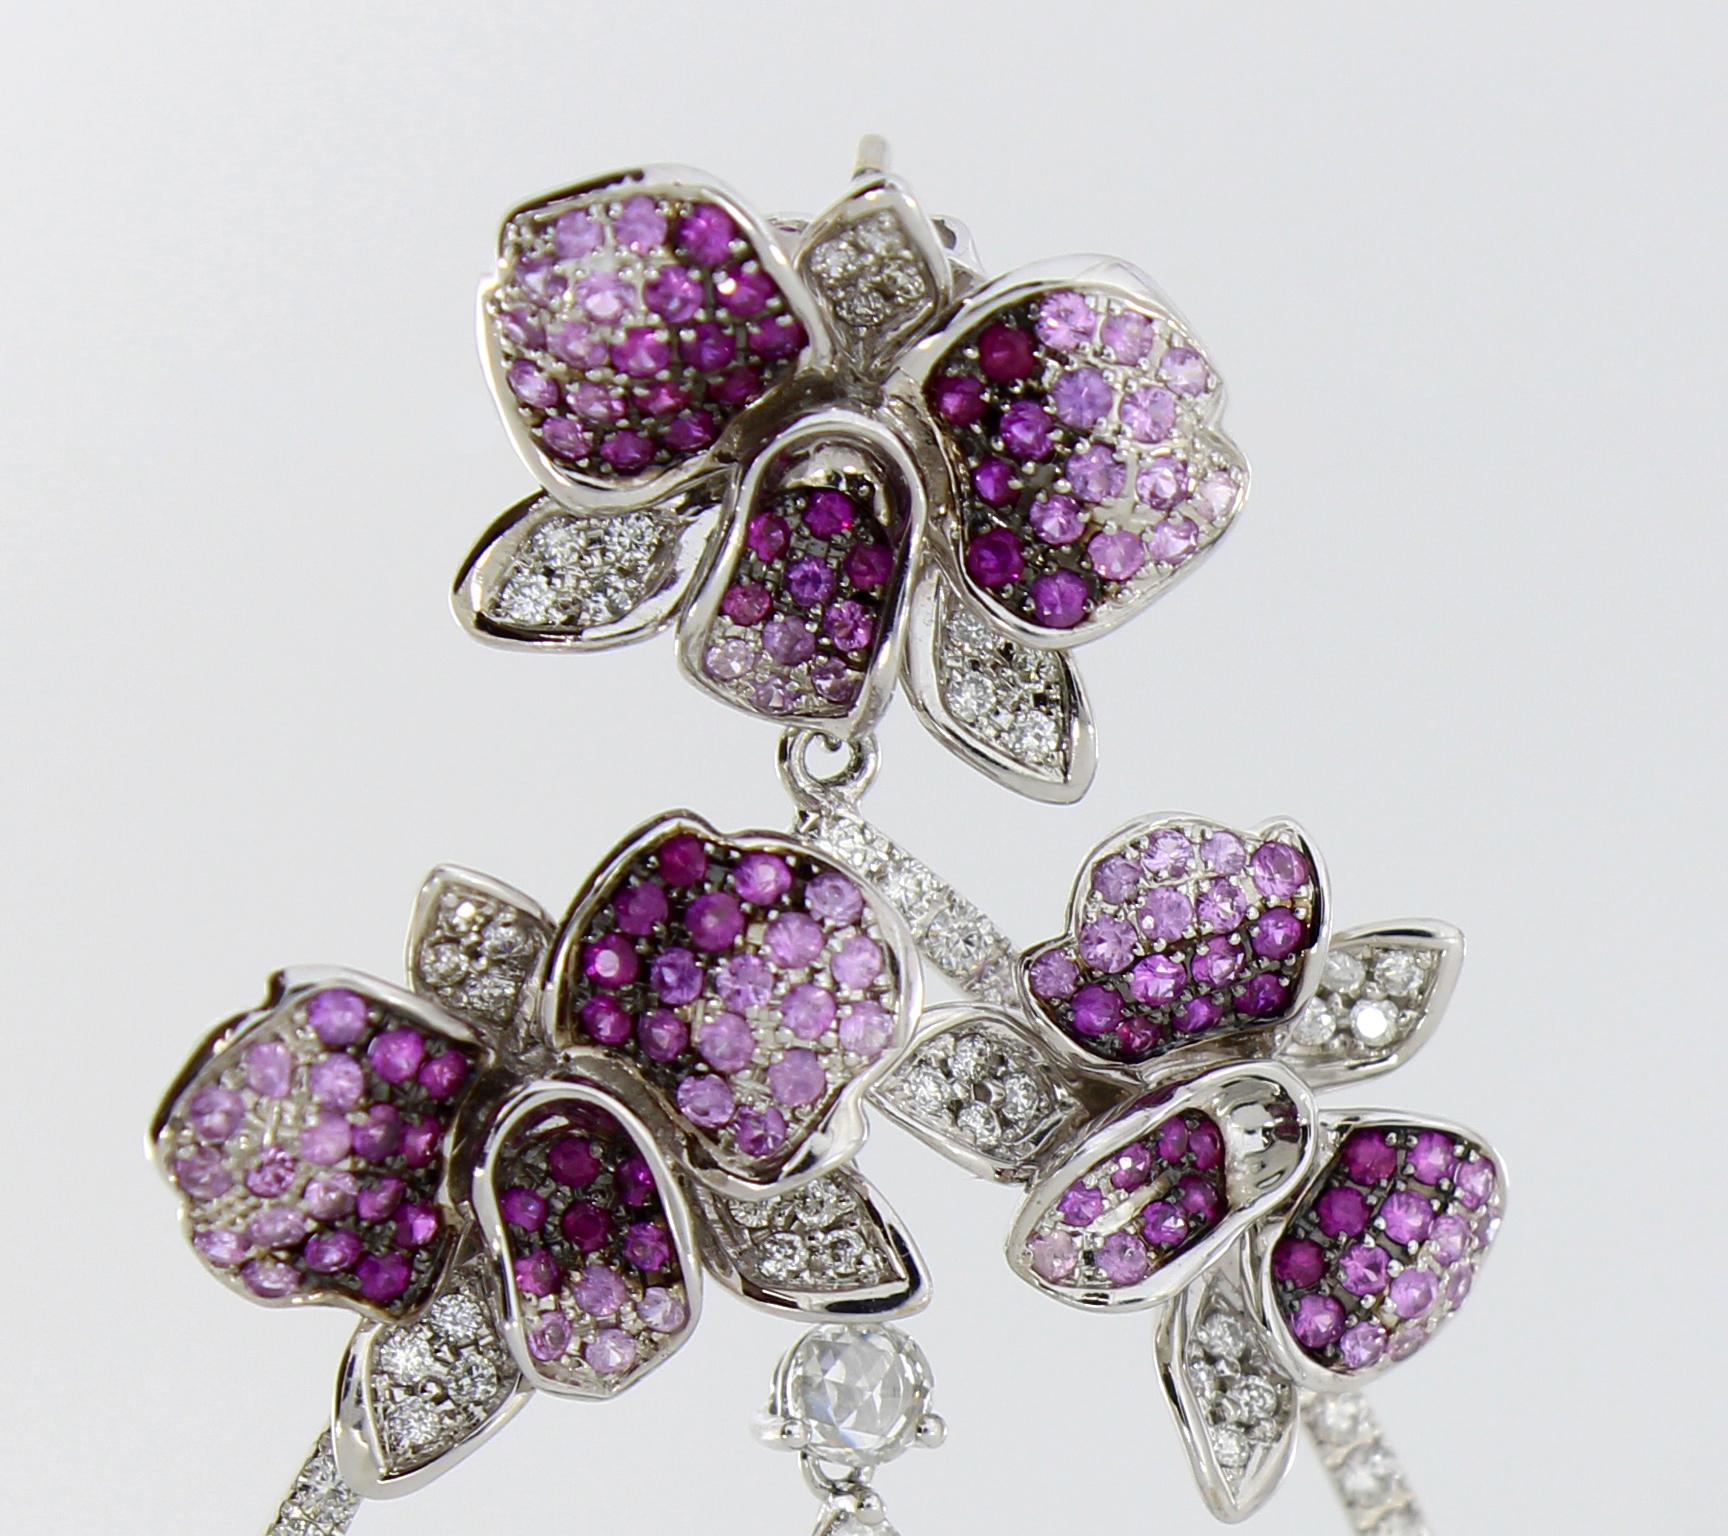 This AUTORE piece is from the Orchid Collection. The Orchid Collection was inspired by the exotic nature of orchids and aims to reflect the intimate and exquisite landscape of Australian flora.

These Earrings feature 18K White Gold (24.18gr), White